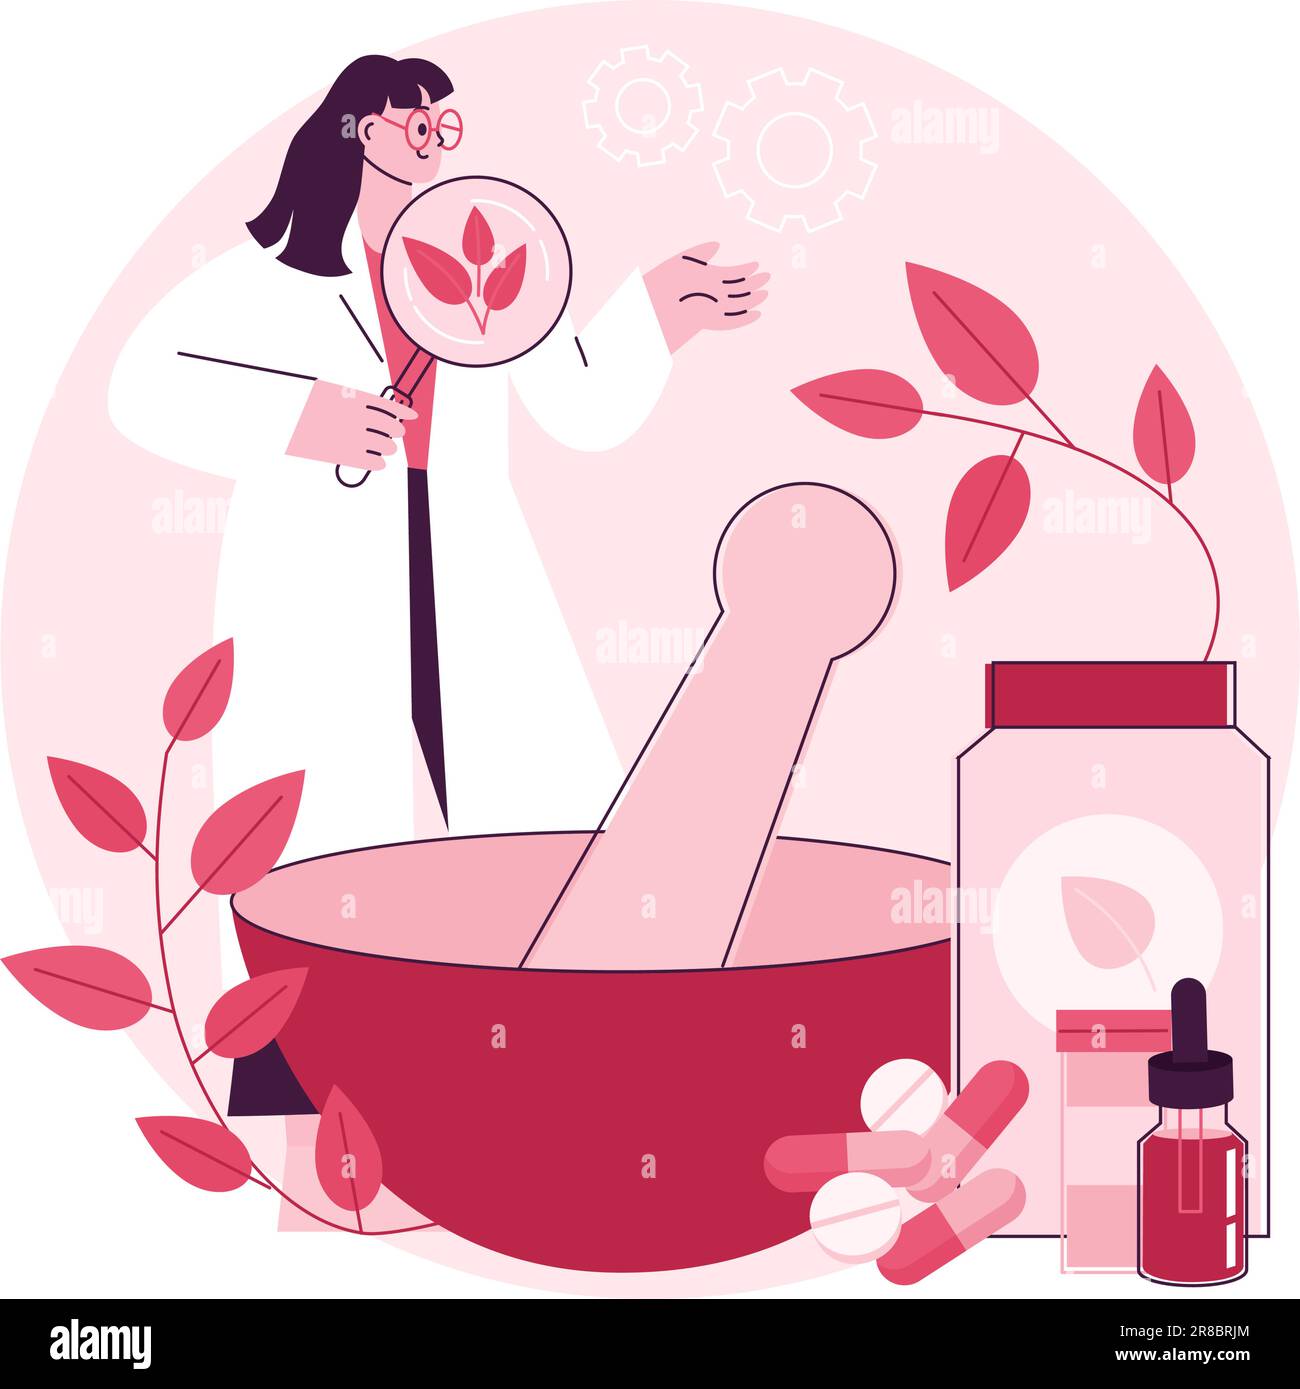 Homeopathy abstract concept vector illustration. Homeopathic medicine, alternative treatment, holistic approach, homeopathy method, natural drug, naturopathic healthcare service abstract metaphor. Stock Vector